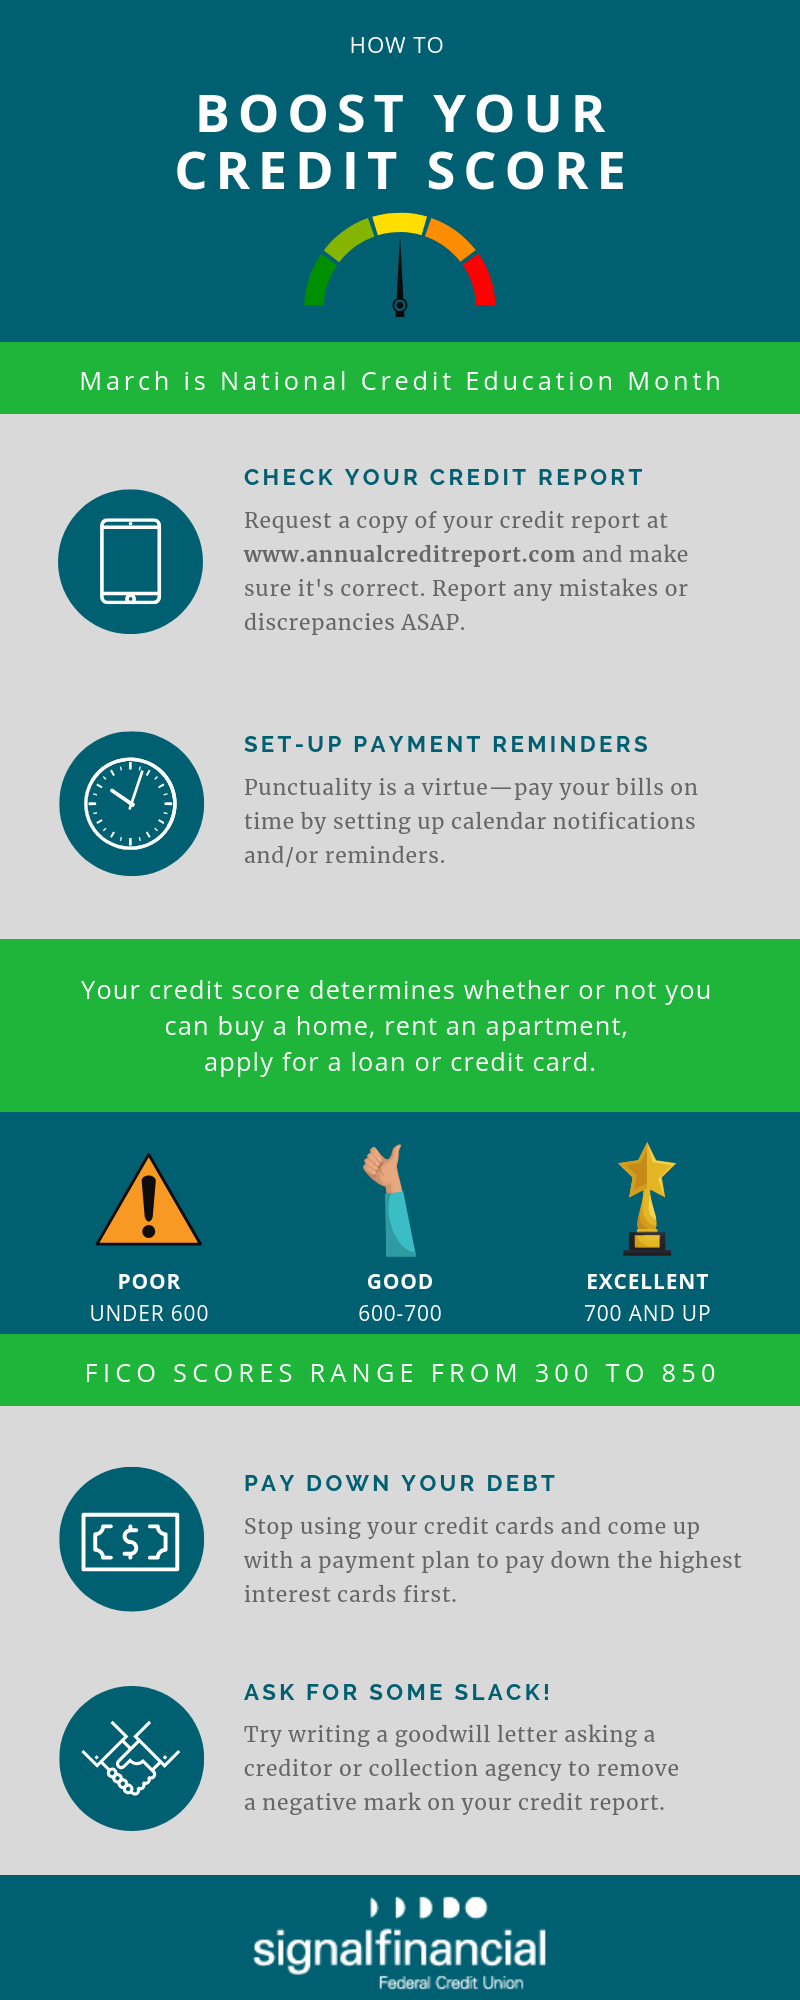 How to boost your credit score for National Credit Education Month